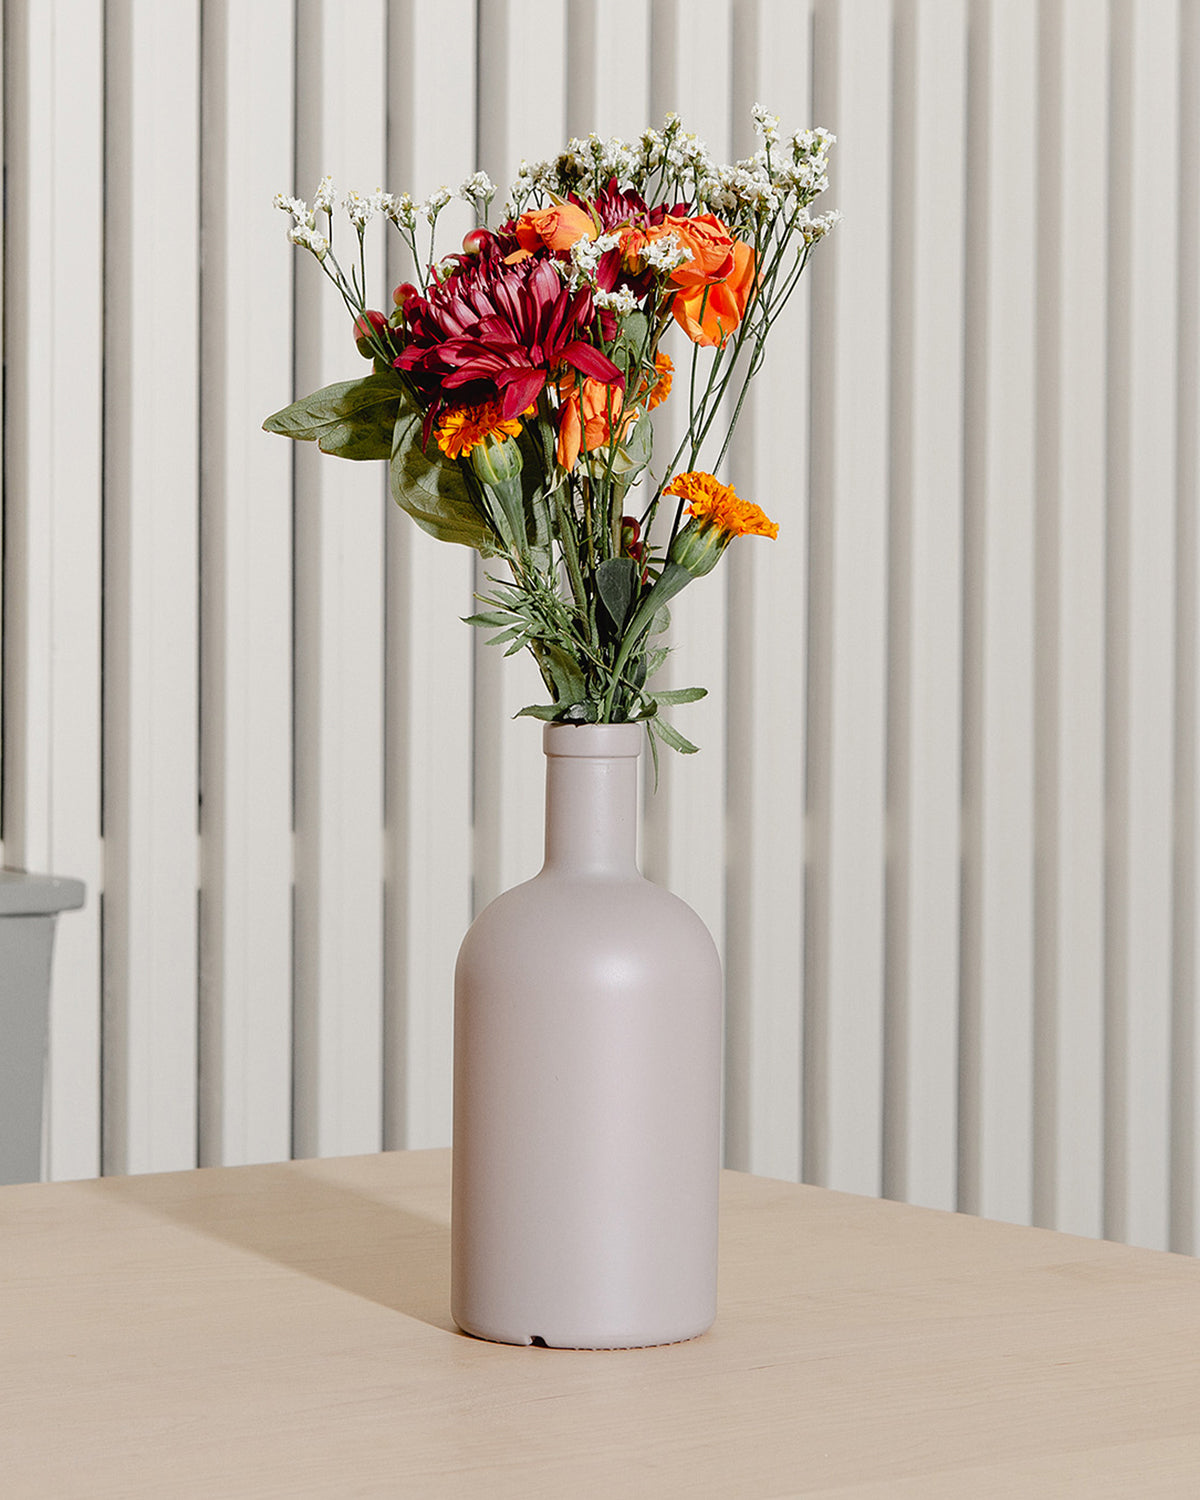 Vase with colorful flowers